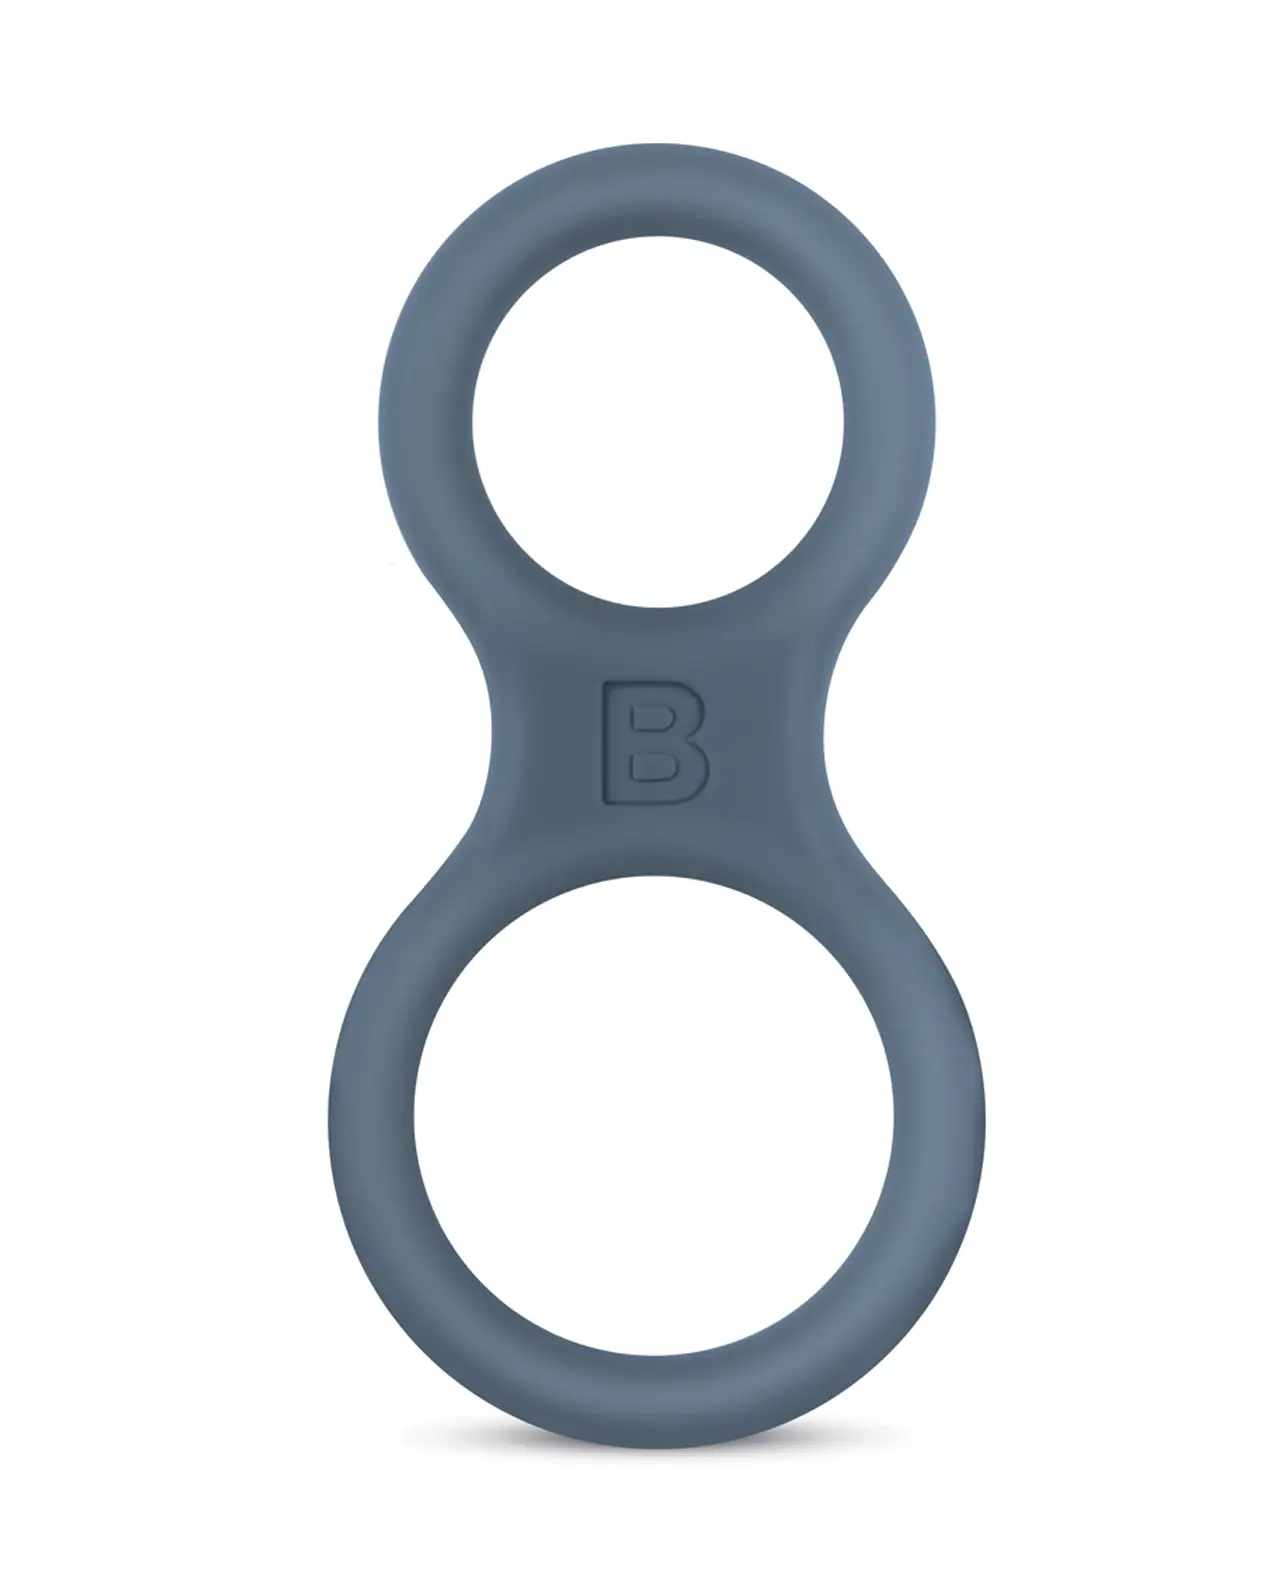 cock ring and ball stretcher in black